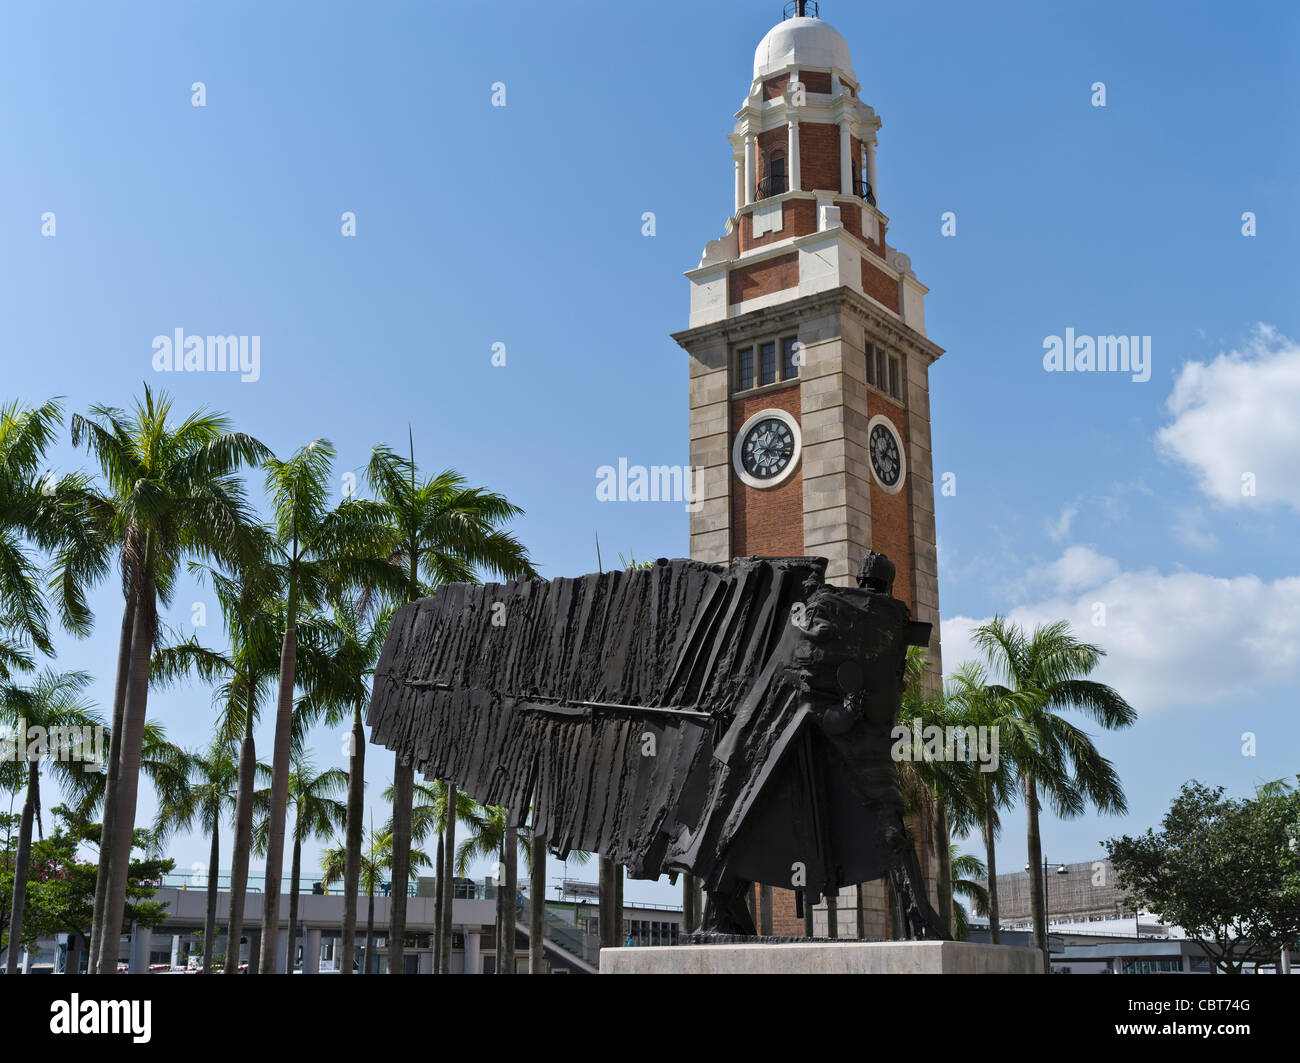 dh Kowloon clocktower TSIM SHA TSUI HONG KONG The Flying Frenchman sculpture by Cesar and Old Clock Tower building modern Stock Photo